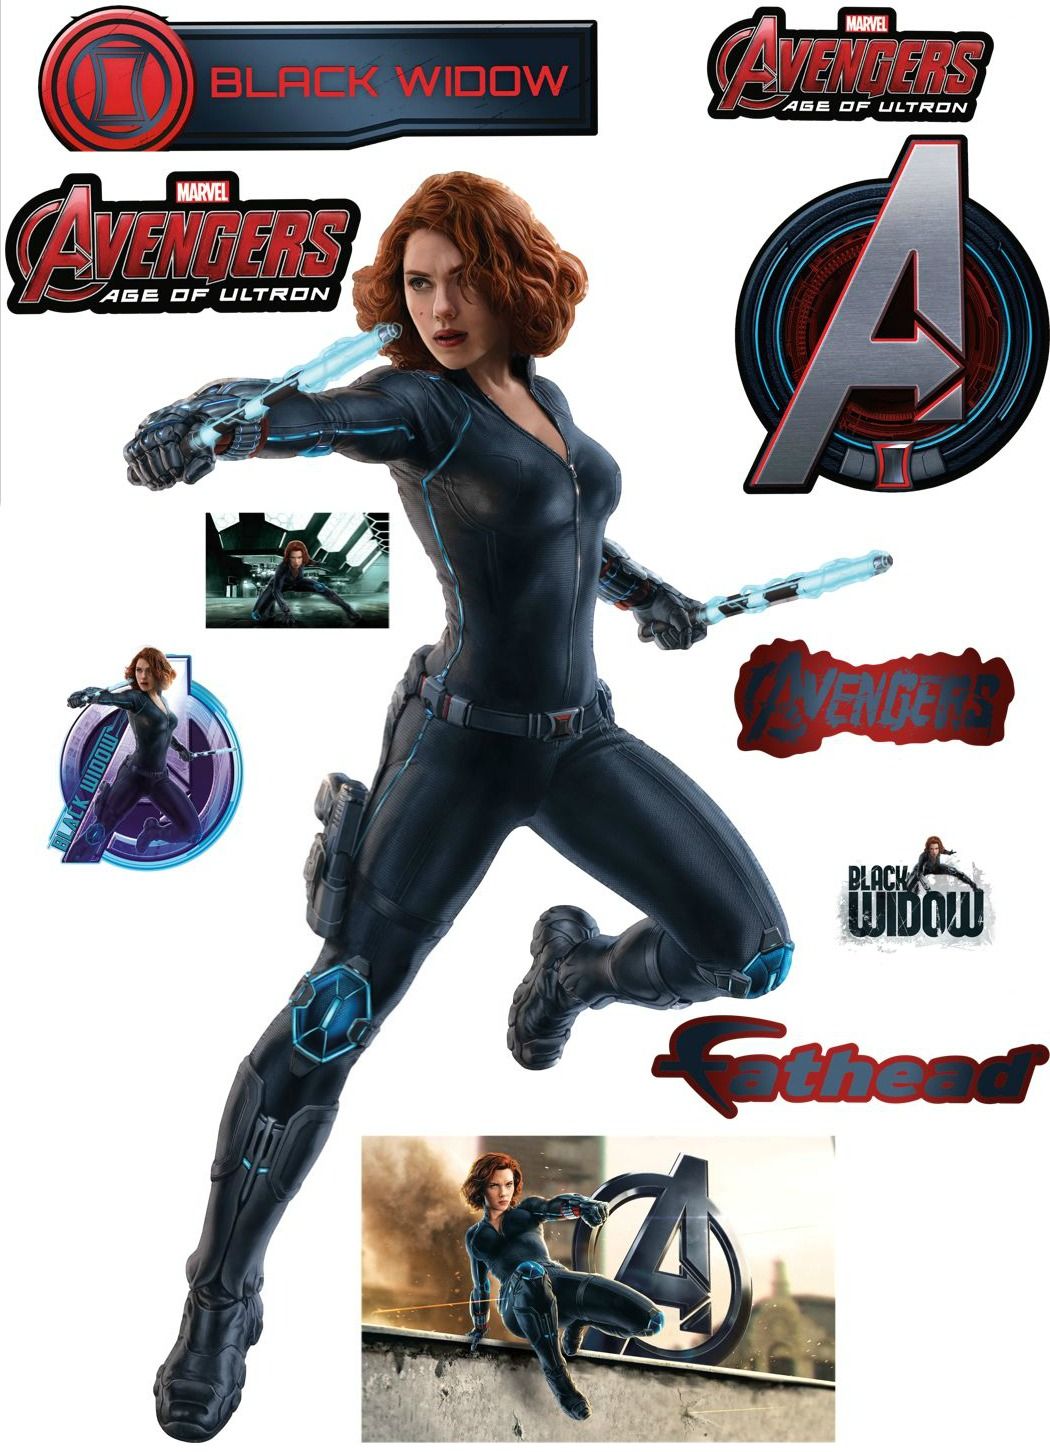 Avengers 2 Fathead Decals 15